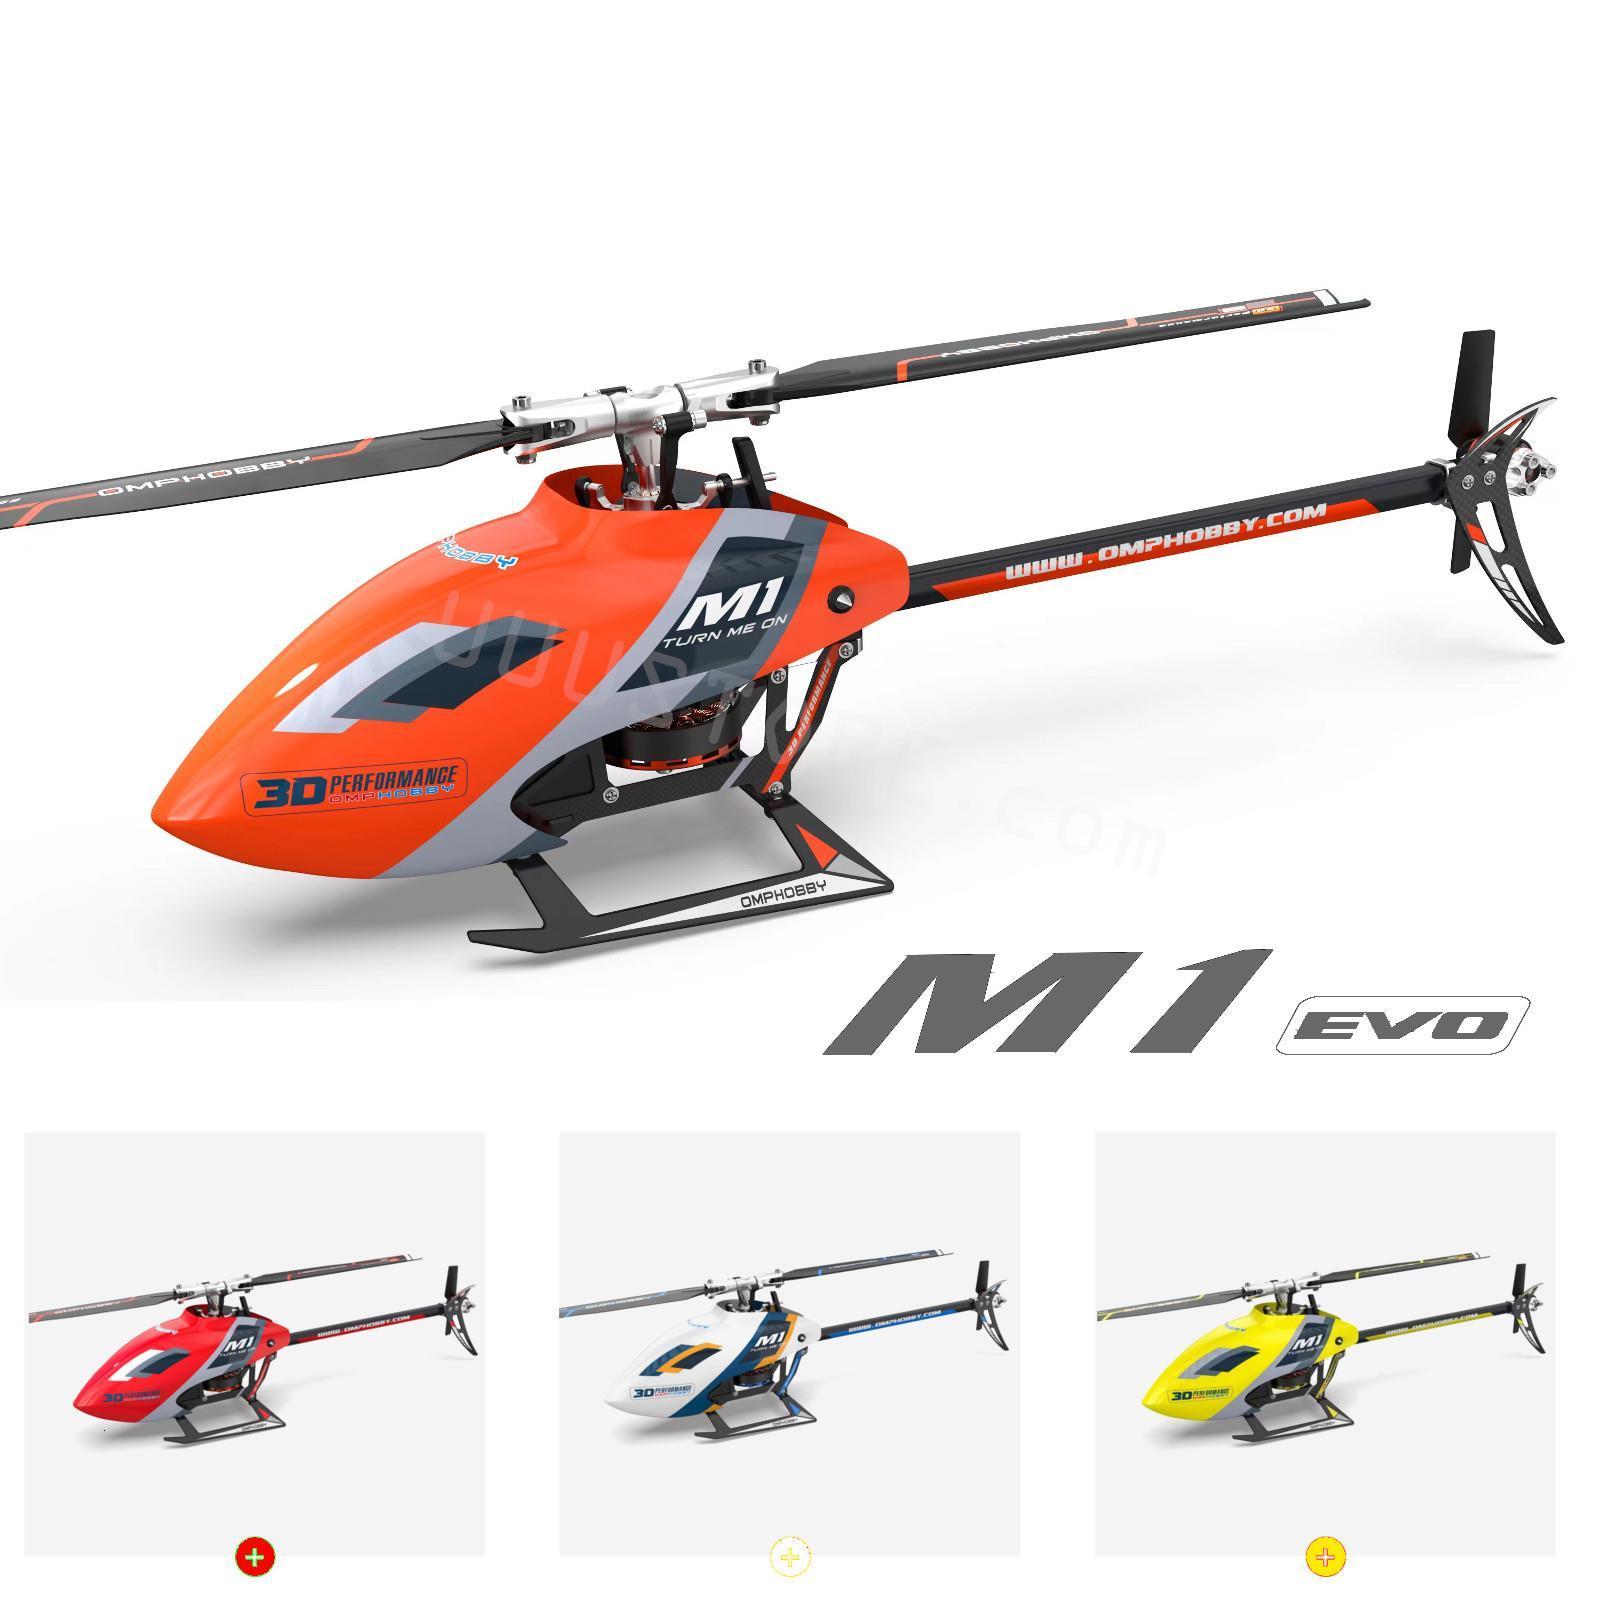 

Electric RC Aircraft OMPHOBBY M1 EVO 6CH 3D Flybarless Dual Brushless Motor Direct Drive RC Helicopter with Flight Controller Model Toys 230529, Bnf red